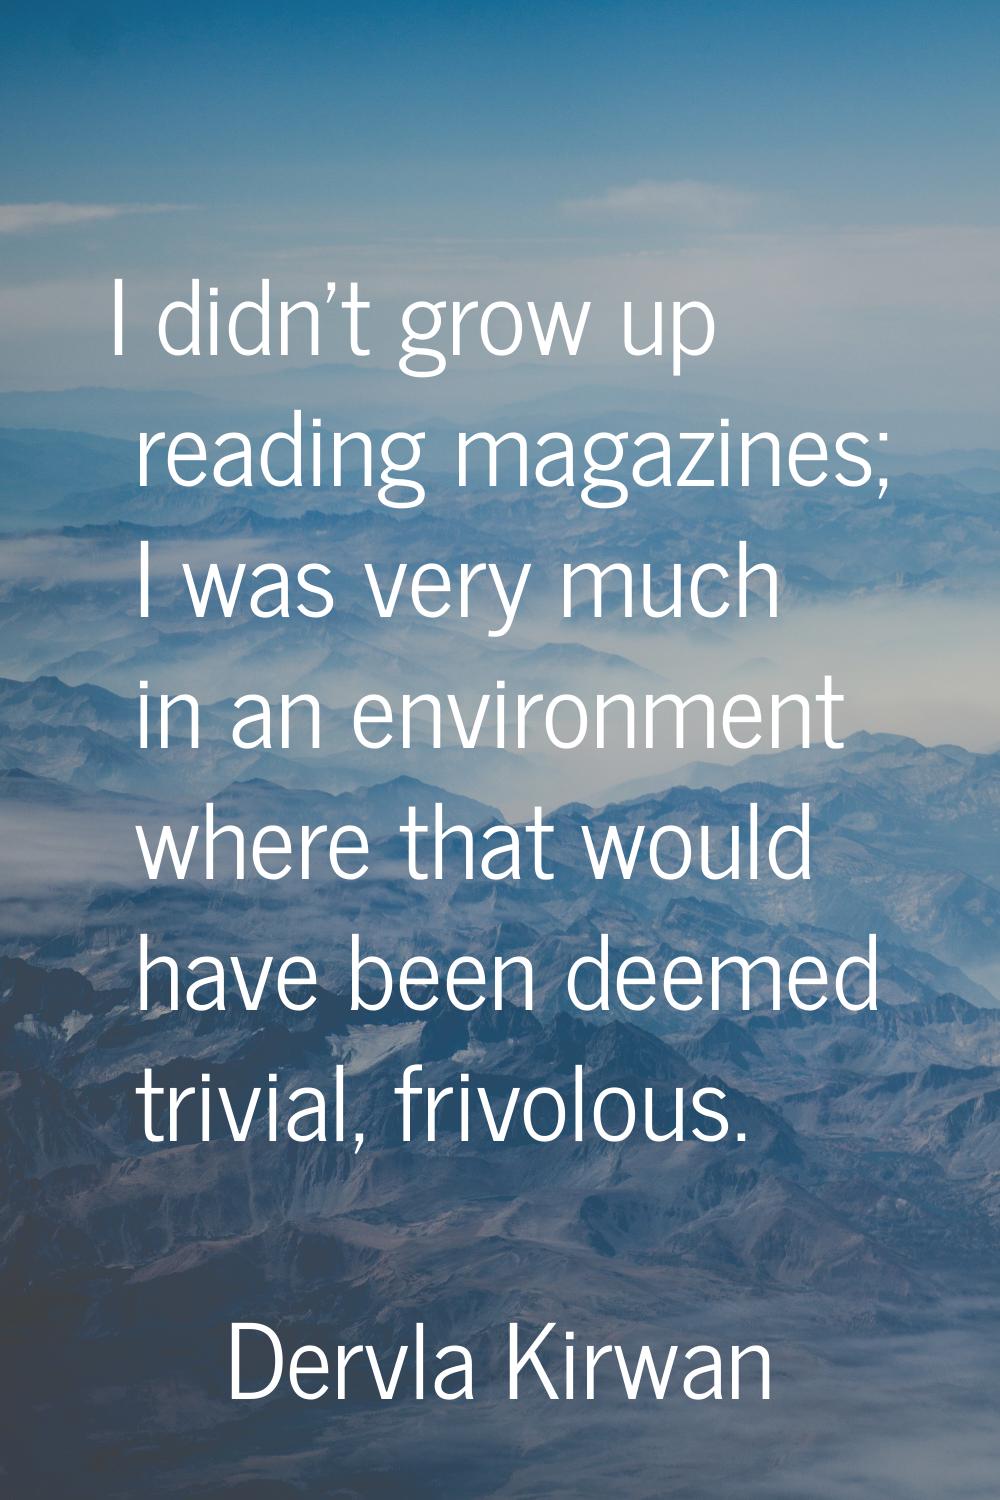 I didn't grow up reading magazines; I was very much in an environment where that would have been de